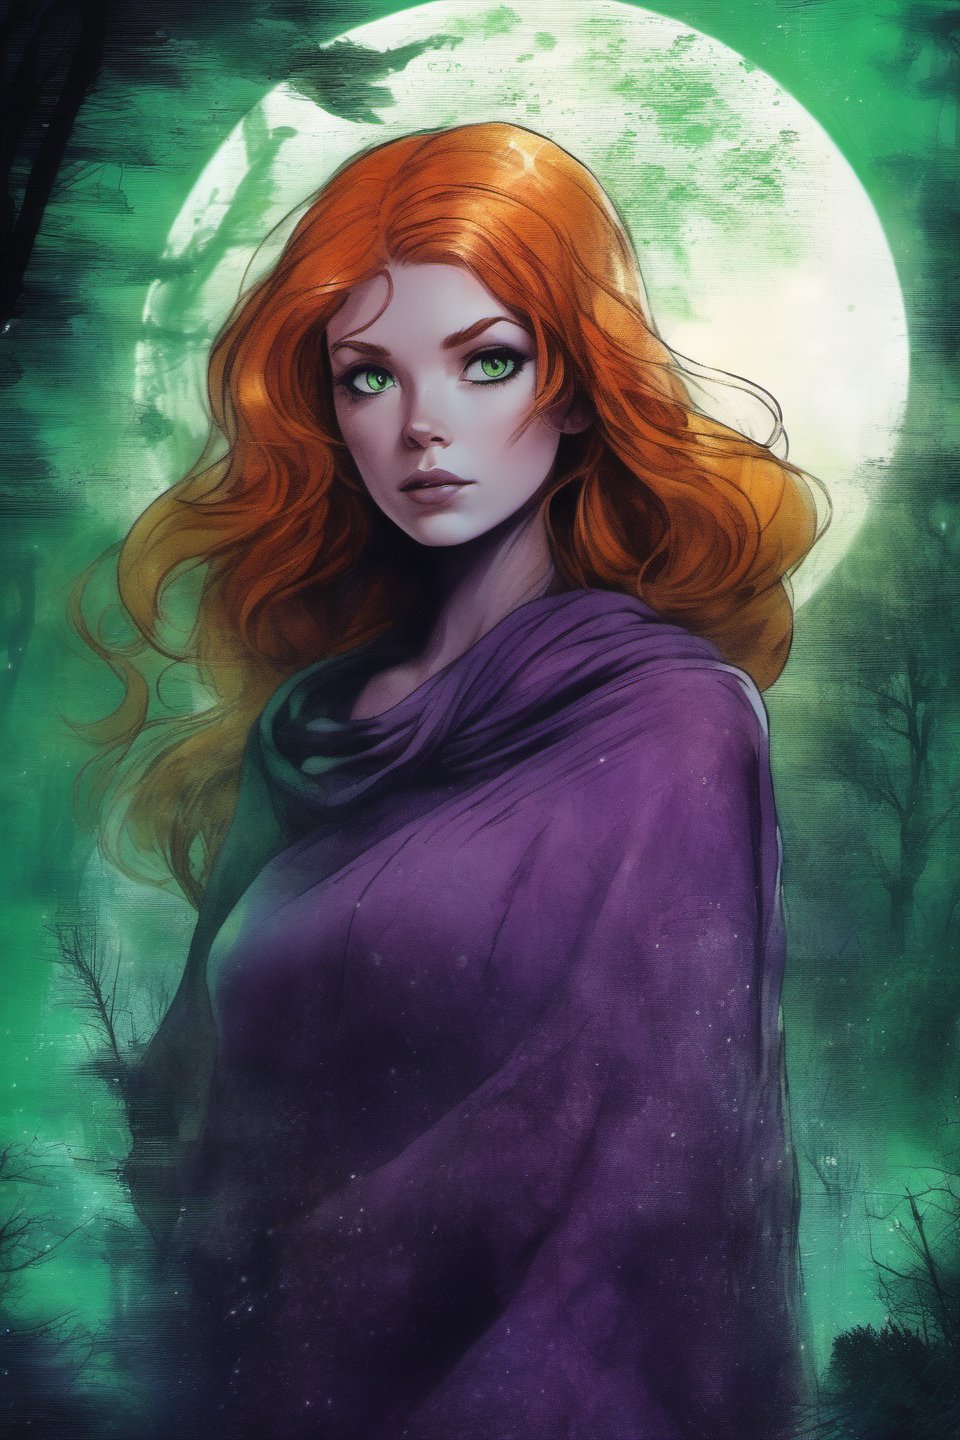 Daphne Blake, (Redhead green_eyes, beautiful_young_woman), (green scarf), (purple dress),  Scooby-Doo Where Are You!, extremely supernatural colours, Highly detailed, highly cinematic, close-up image of a deity of investigation, perfect composition, psychedelic colours, magical flowing mist, forest nature, silver_fullmoon, lots of details, ink, abstract,  metallic ink, beautifully lit, a fine art painting by drew struzan and karol bak, gothic art, dark and mysterious, ilya kuvshinov, russ mills, 
